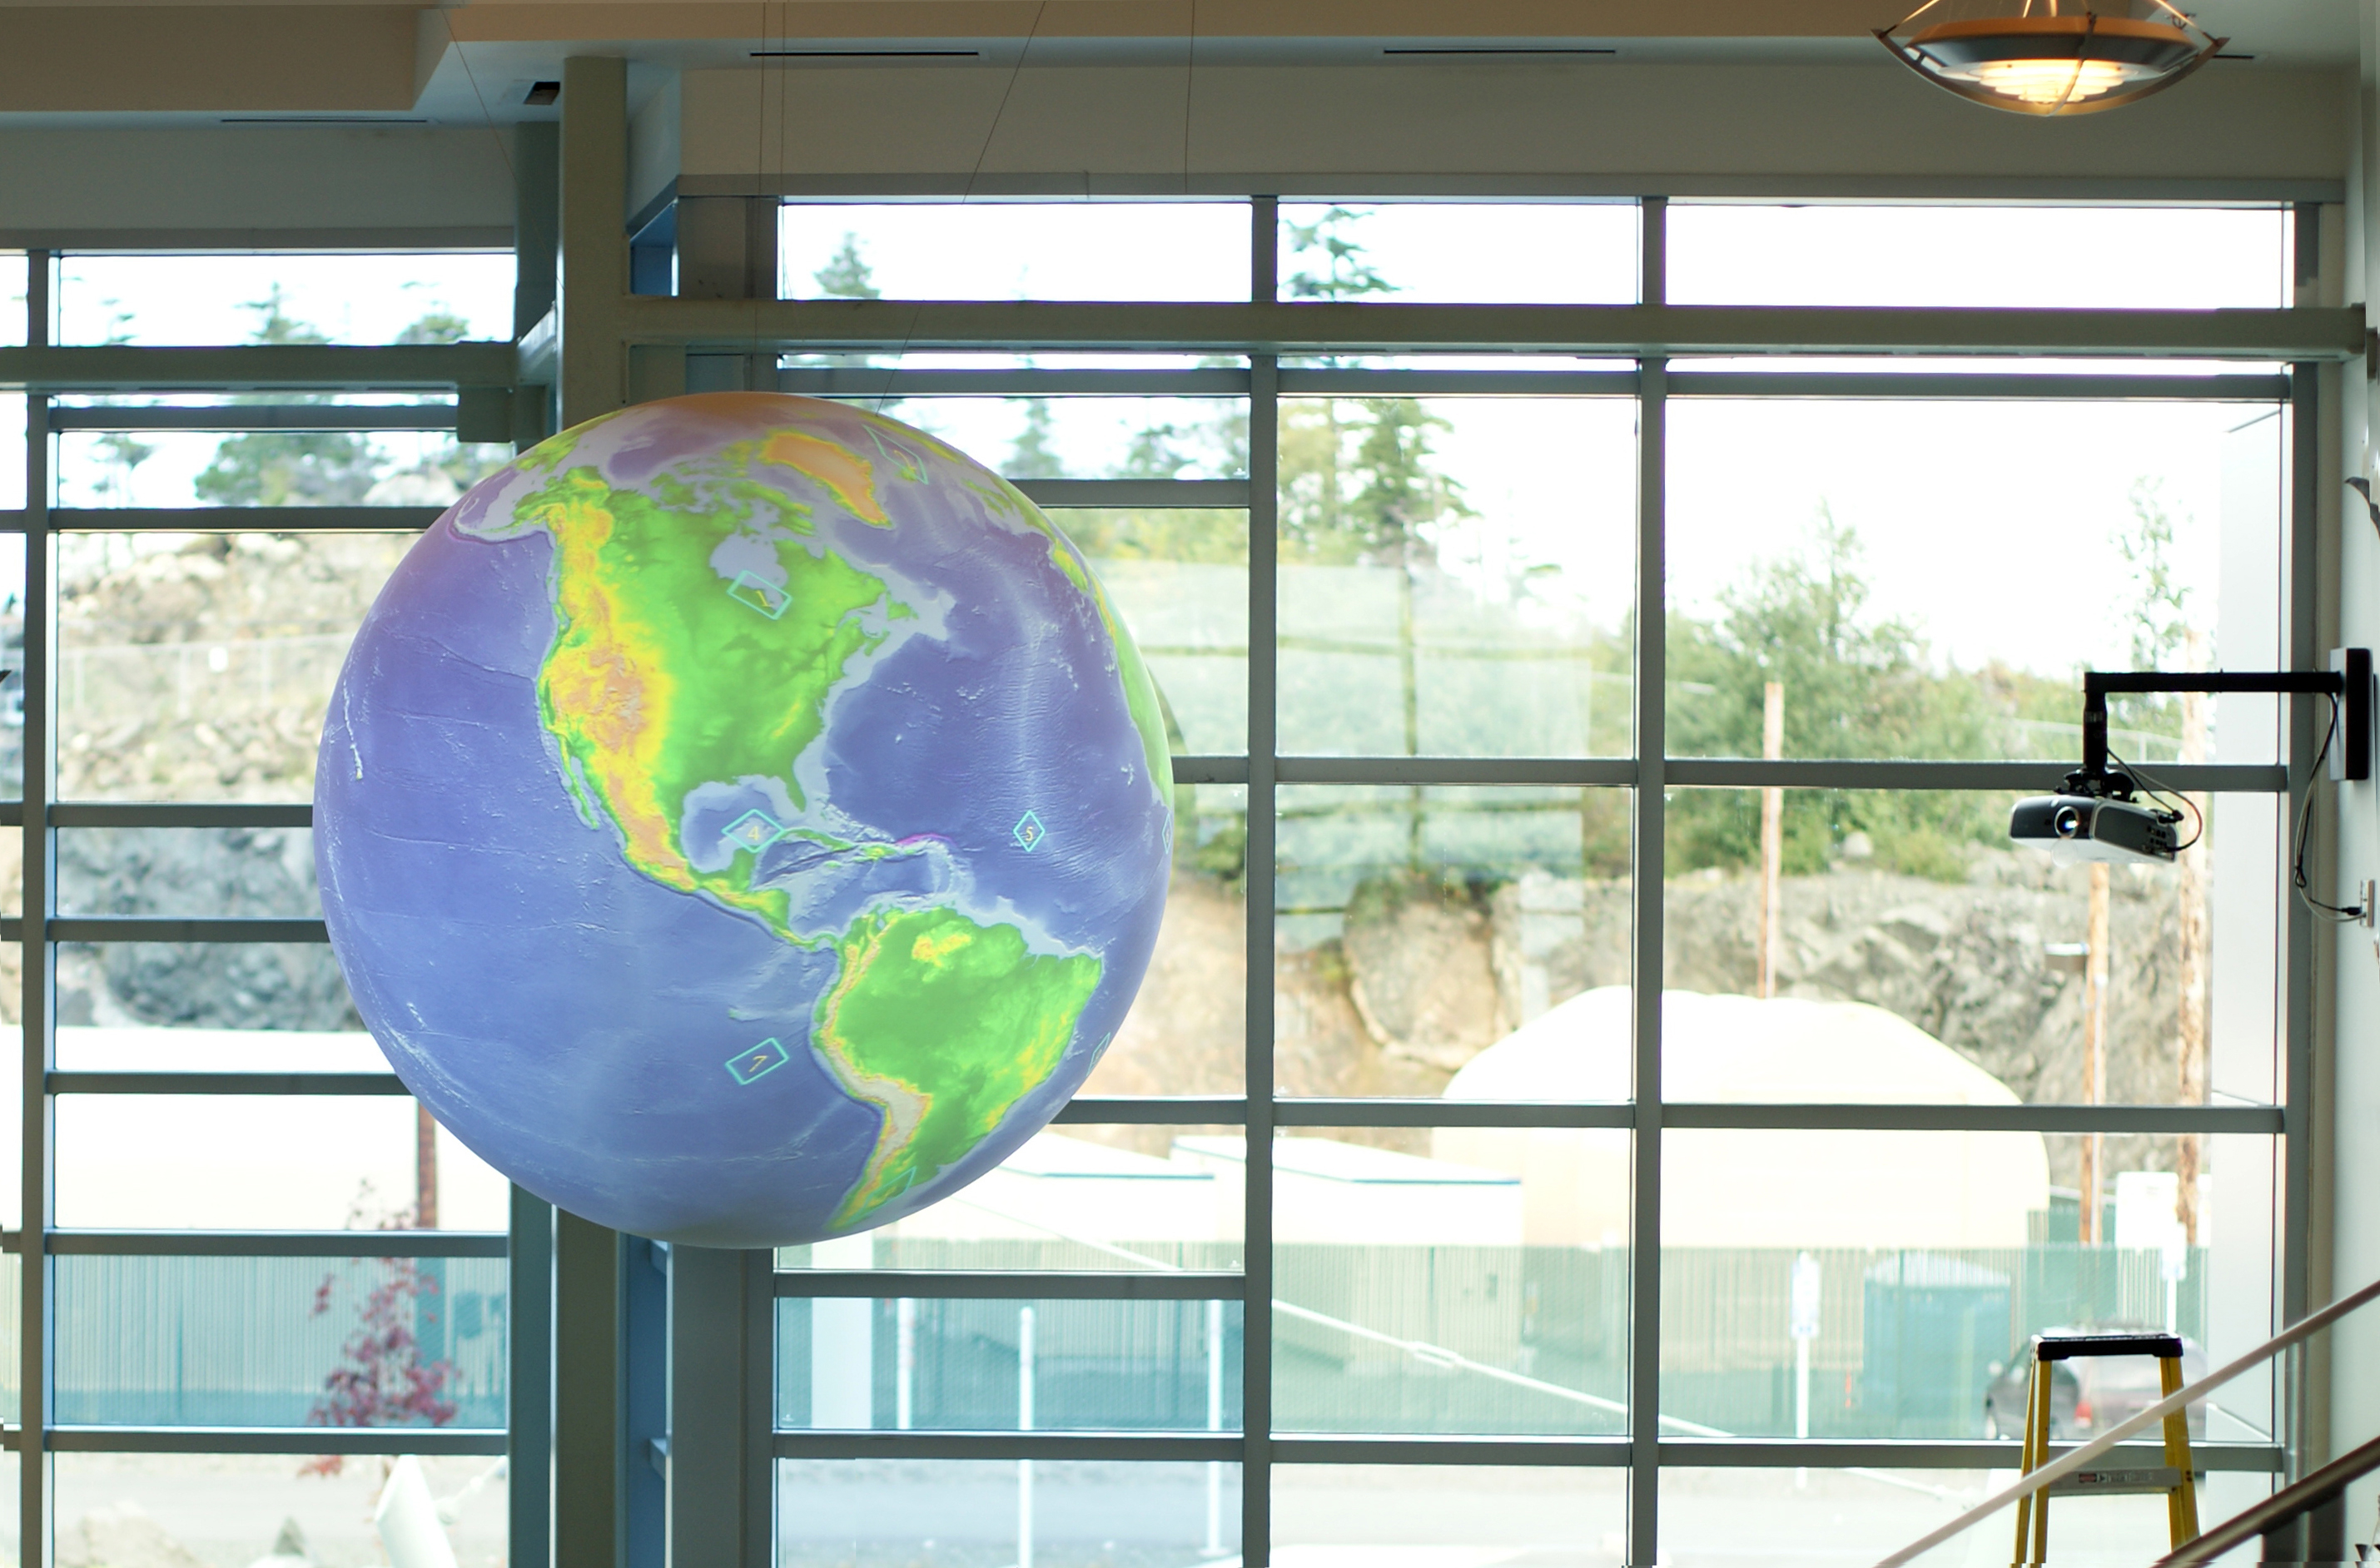 Science On a Sphere hangs in a well-lit room in front of several large windows. Several large tanks can be seen through the window, along with a rock face and some trees